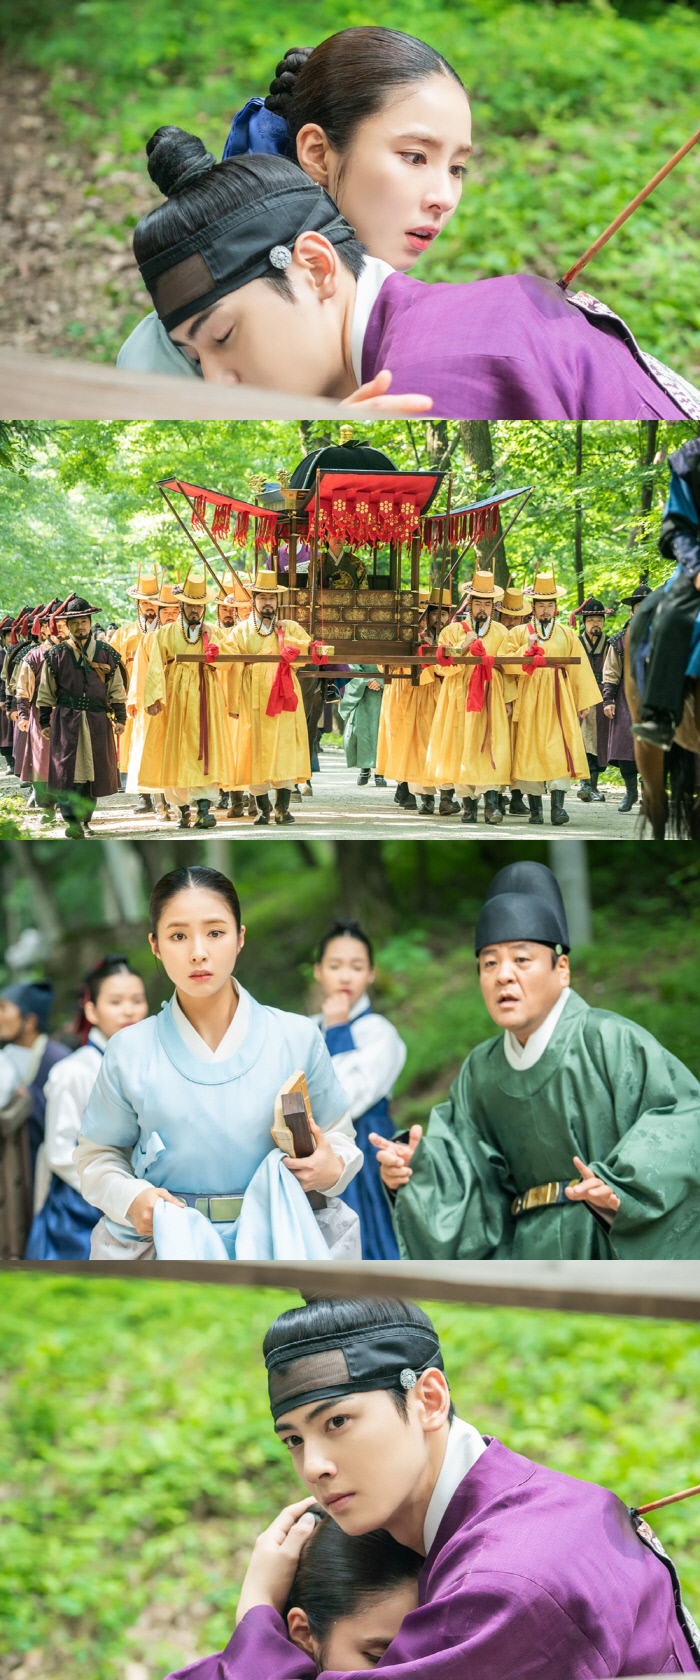 The new recruits, Na Hae-ryung, Shin Se-kyung, and Cha Eun-woo, were attacked and panicked on their way.In particular, Cha Eun-woo is caught in the shape of Shin Se-kyung and shot at her instead of the arrow that flew to her.MBCs tree drama Na Hae-ryung (directed by Kang Il-soo, Han Hyun-hee/playplayplayed by Kim Ho-soo/produced Green Snake Media) unveiled the images of Koo and Lee Rim (played by Shin Se-kyung) who were attacked by surprise on the 18th.In the 29-32 episode of the previous broadcast, Na Hae-ryung, the new recruit, depicted Na Hae-ryung and Irim, who faced a romance crisis due to the sudden preparation of the wedding.Na Hae-ryung finally refused Lees love confession, and the two of them were excited by each others mixed hearts and stimulated the tears of viewers.The photo released on the 18th showed Na Hae-ryung and Irim being attacked suddenly while they were on their way. Unexpected arrows flew to those who were peacefully heading somewhere.The scene where Na Hae-ryung, who is frozen as it is when he sees the arrows falling in front of him, and the scene where he became a mess from the inside Husambo (Seongjiru) to the surprised Nines catches his eye.Above all, Irim is hit by an arrow that flew to Na Hae-ryung instead, robbing the Sight.Na Hae-ryung wraps around him and looks at where he has flown from. In the end, he can feel his gentle heart toward Na Hae-ryung through his loss of mind.Na Hae-ryung is looking at the arrows on his shoulder with a trembling eye, holding him down without power, and he is interested in who will be able to be safe and who will be behind this incident.Na Hae-ryung, who is on the way with Lim (Kim Yeo-jin), will be attacked, said the production team of the new employee, Na Hae-ryung and Irim.Were going to see a blue light in the palace through this raid, so please check it through this broadcast, he said.The new officer Na Hae-ryung, starring Shin Se-kyung, Cha Eun-woo and Park Ki-woong, will air on Wednesday, September 18 at 8:55 pm 33-34.